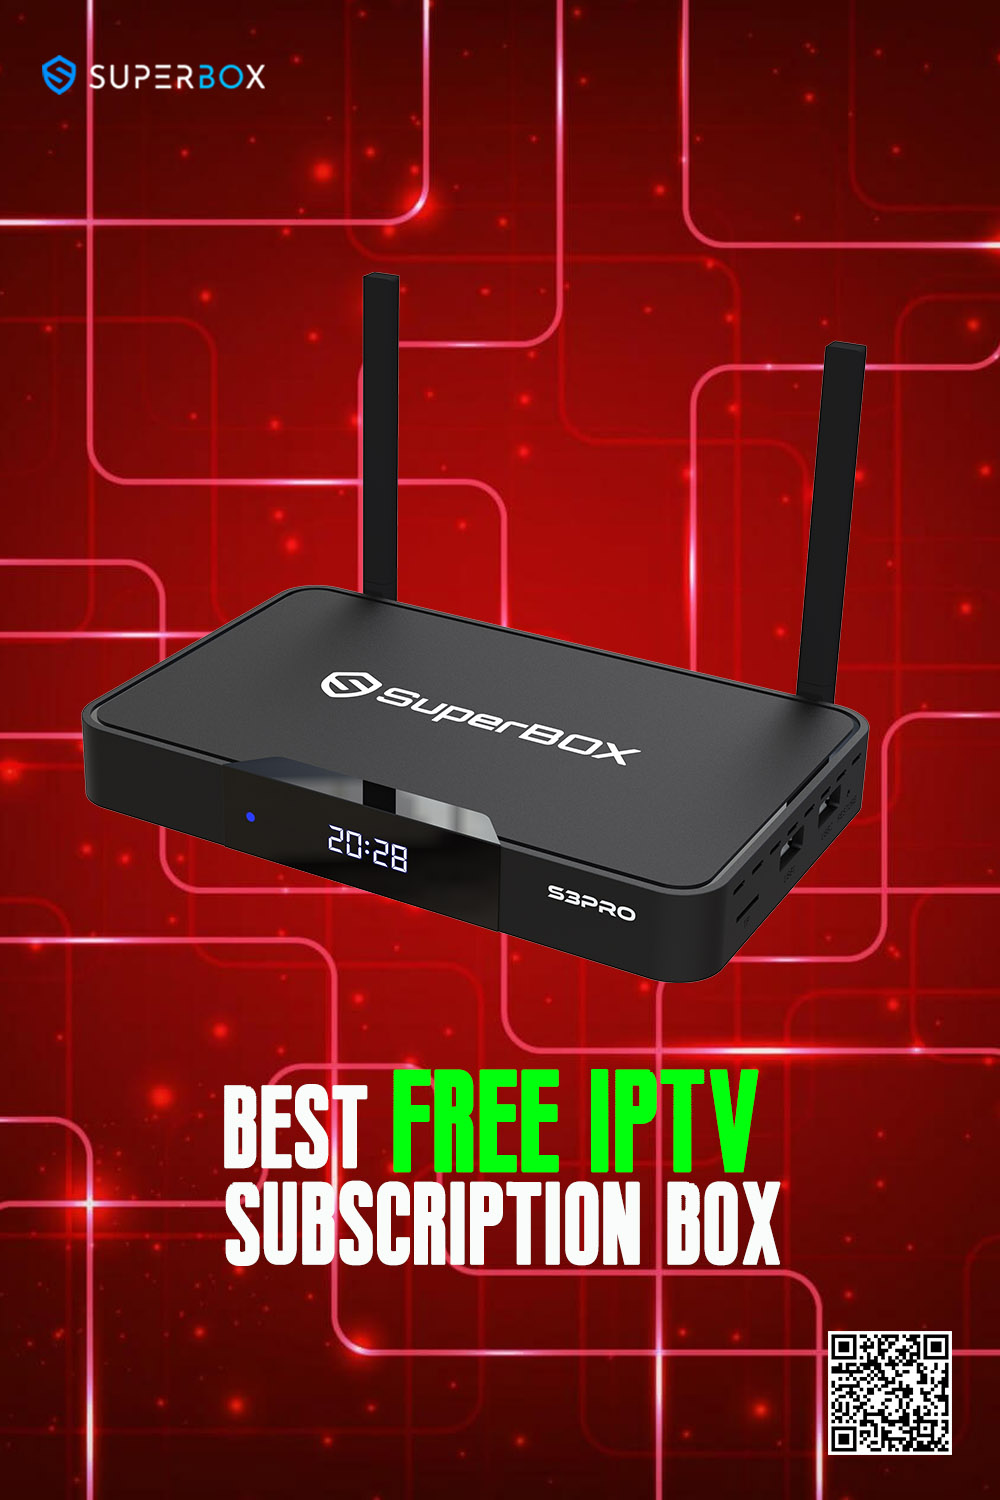 The Best Free IPTV Subscription Box for You